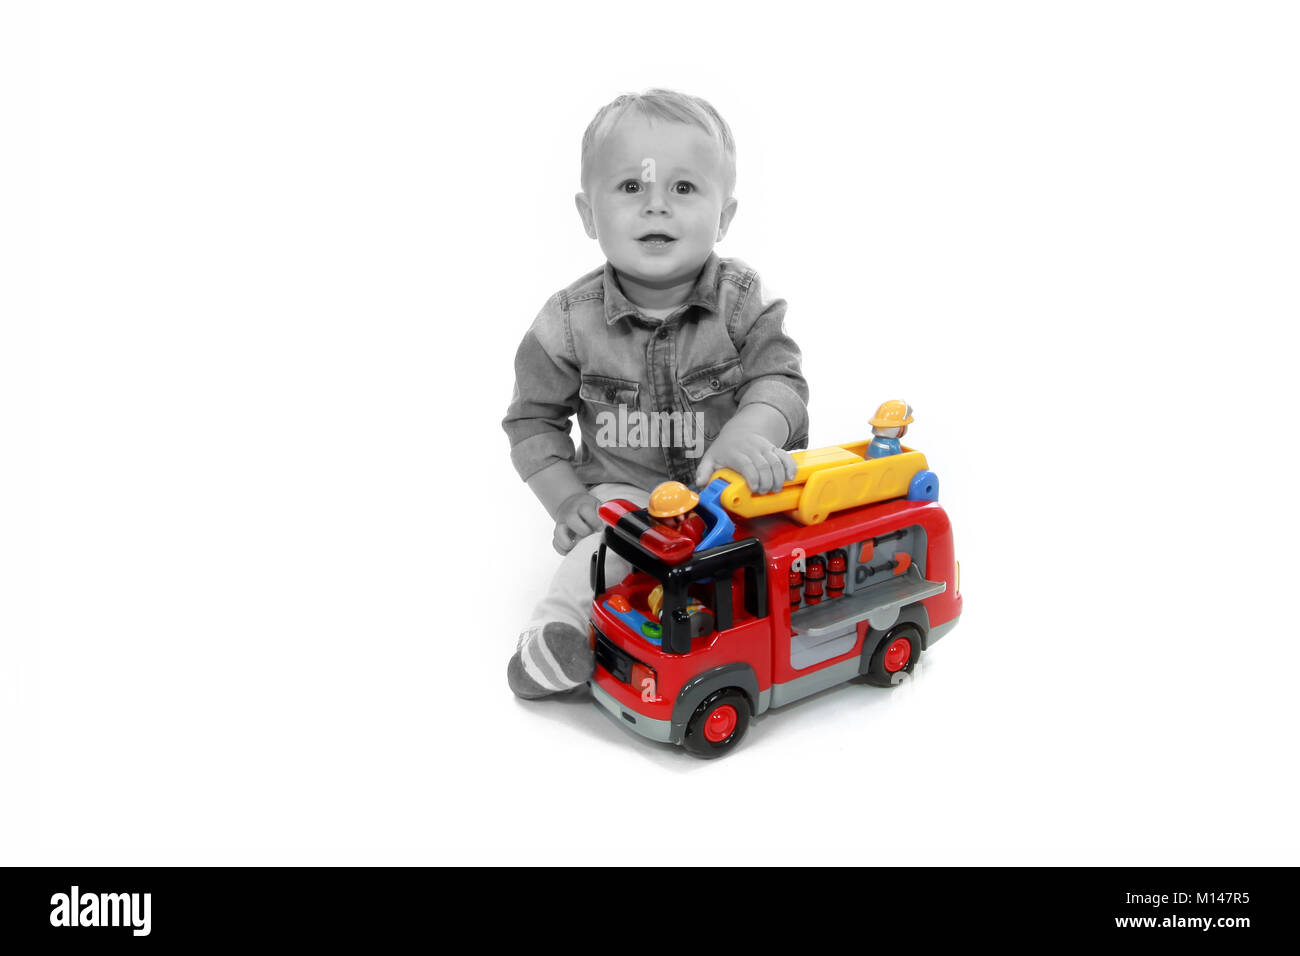 19 month old toddler playing with toy fire engine, childhood development Stock Photo